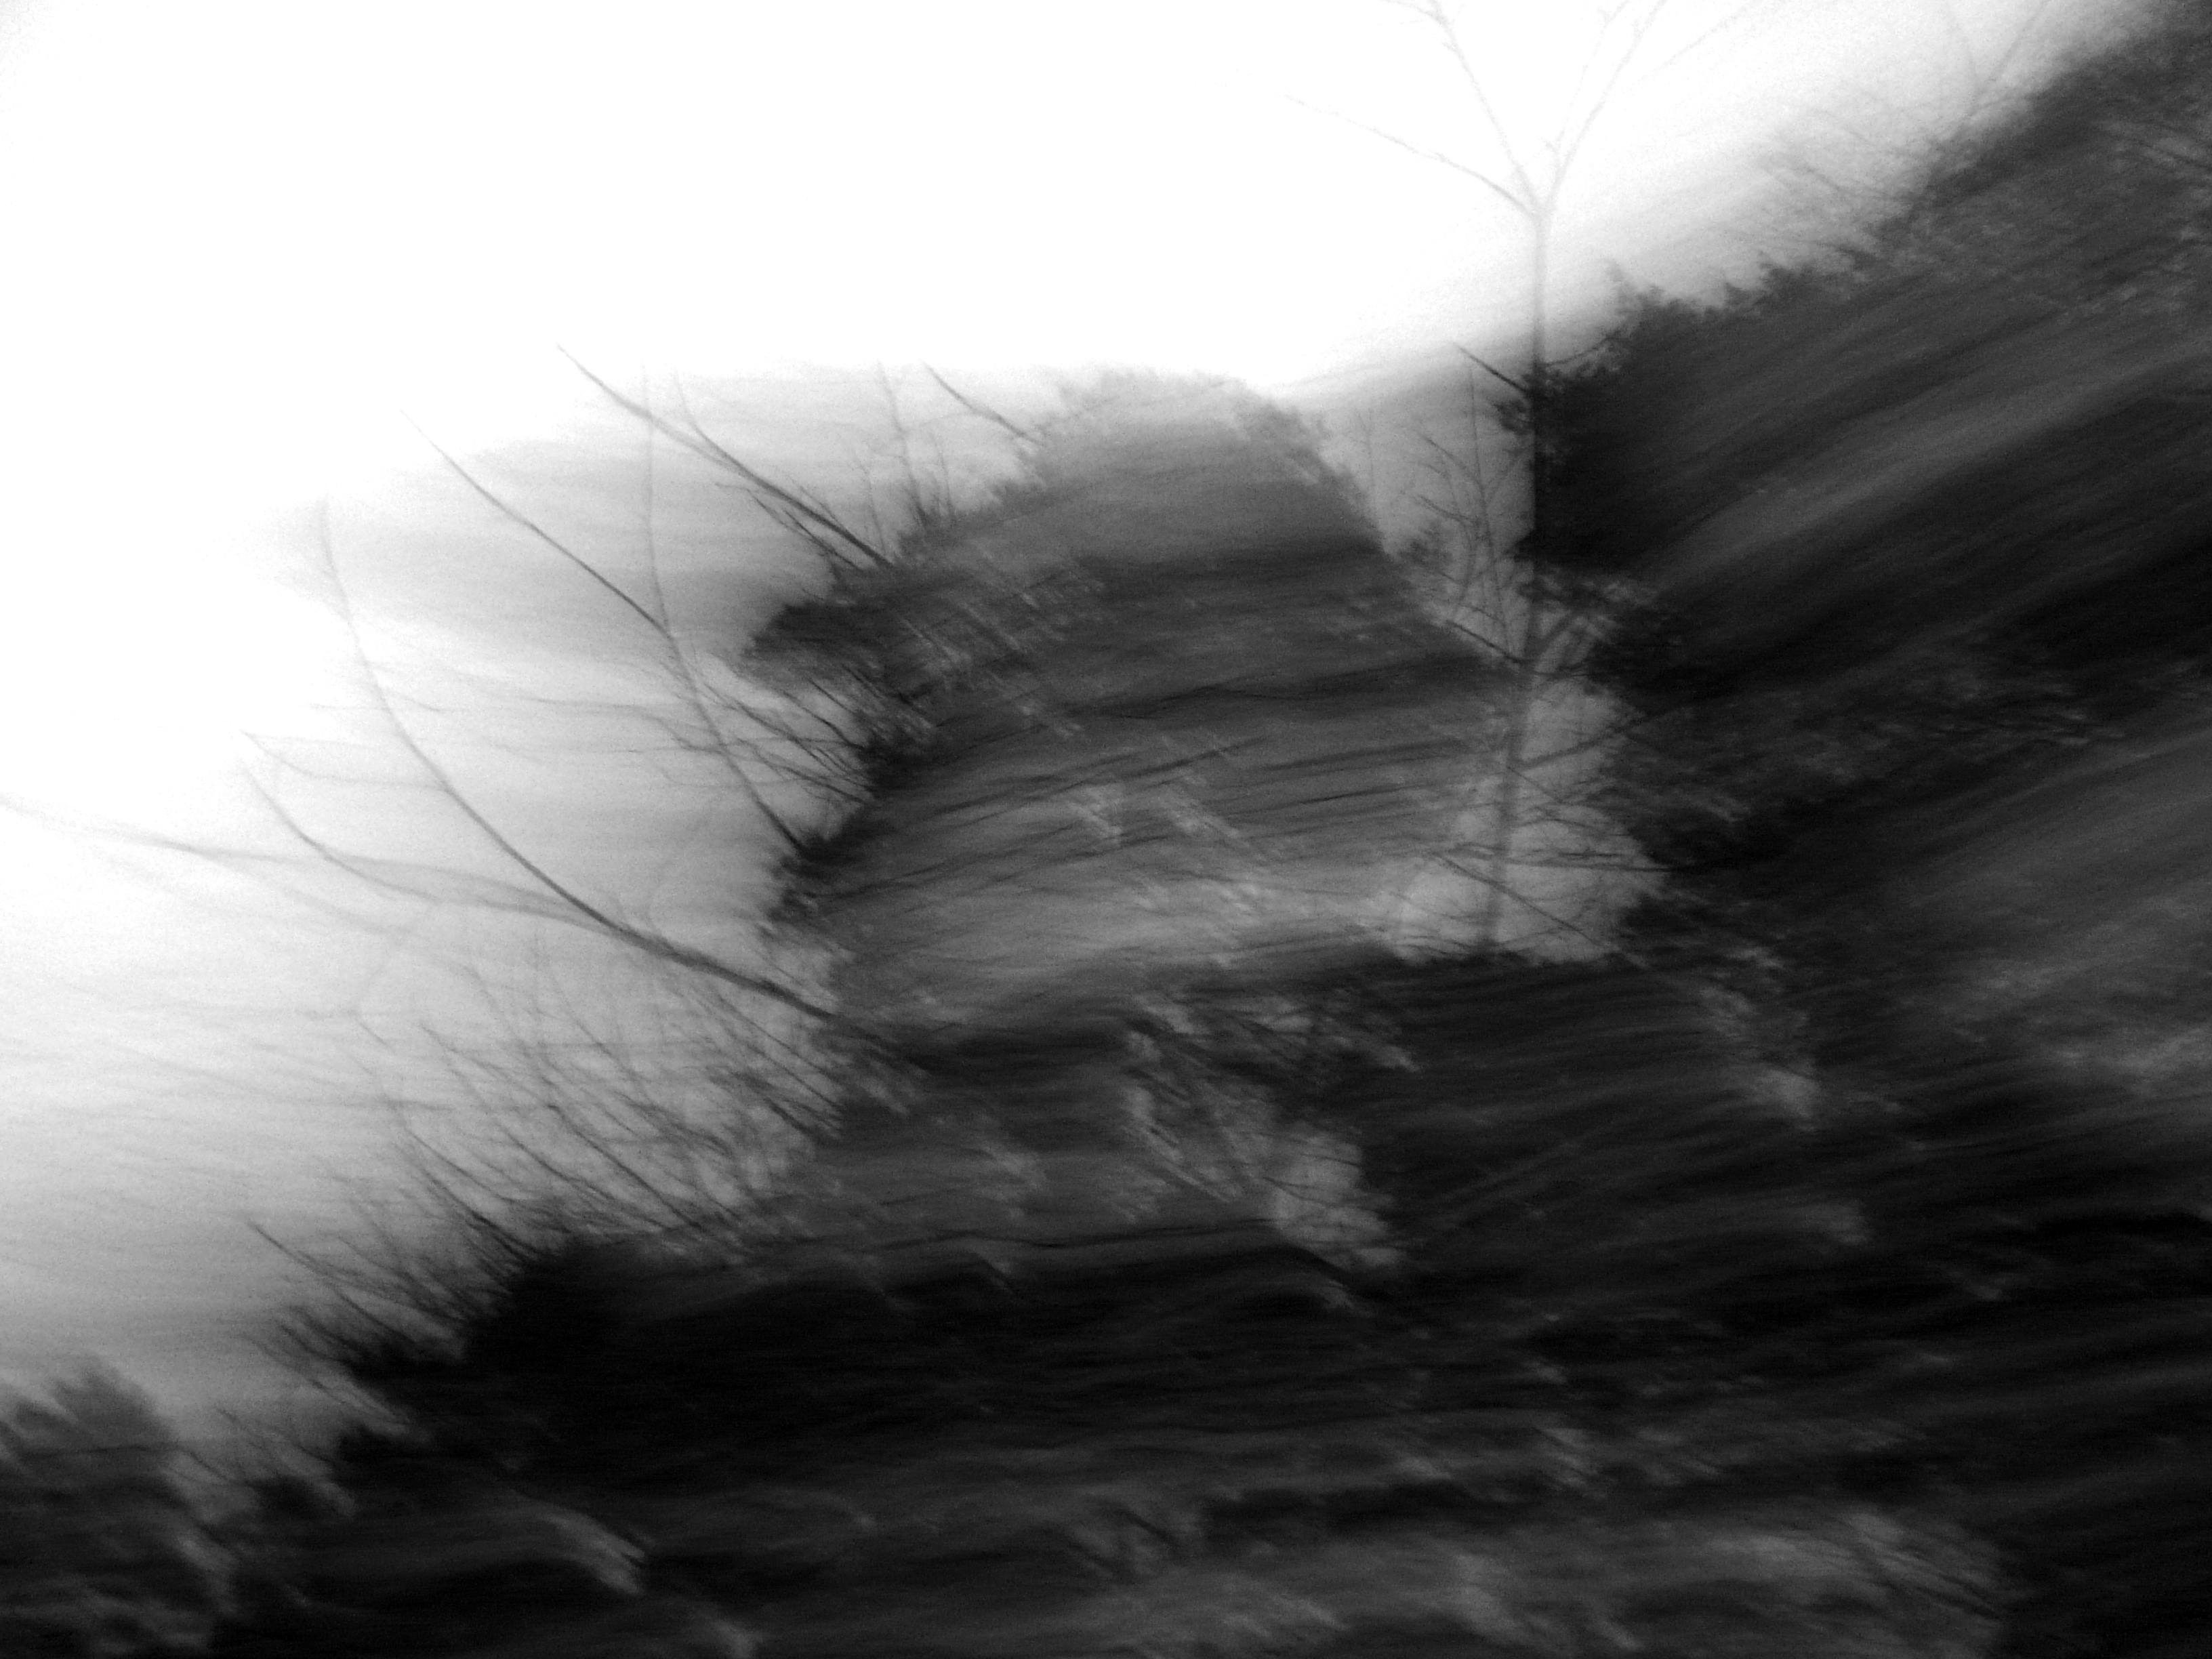 Black and white photograph of trees moving in a blur across the image